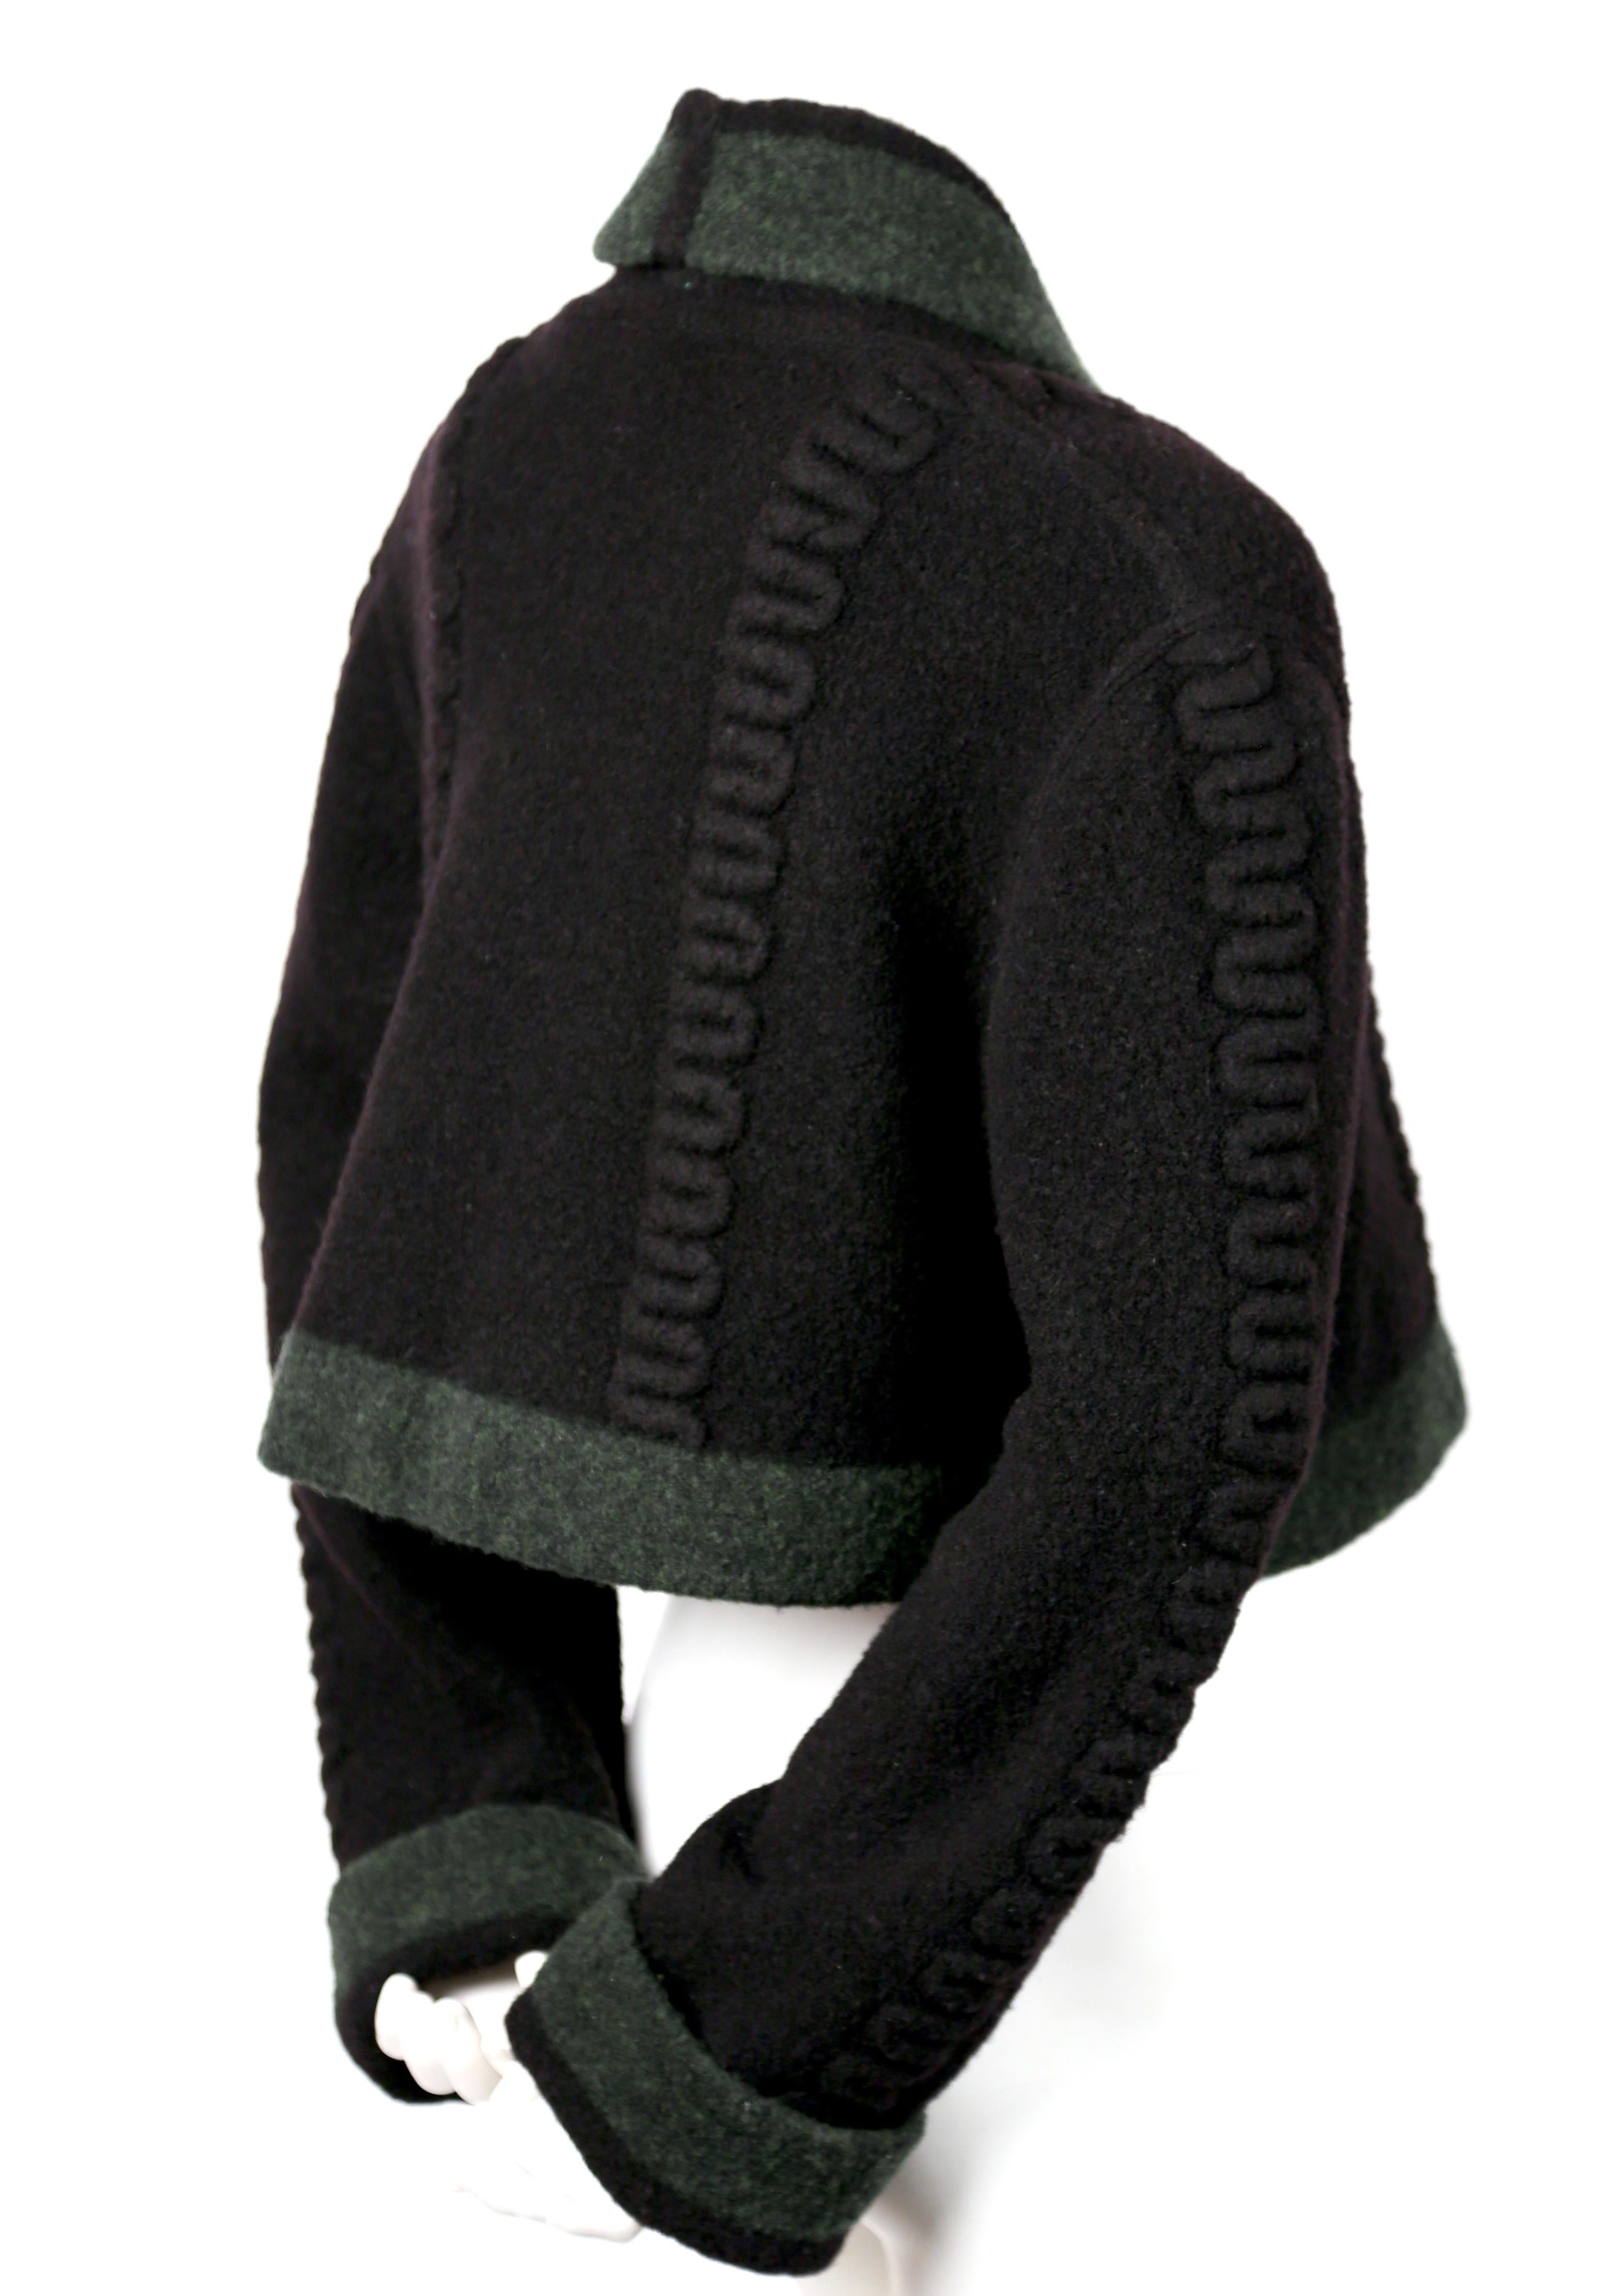 Deep navy-blue and green cropped wool cardigan sweater with raised weave and shell buttons designed by Azzedine Alaia dating to fall of 1994. Labeled a size 'S'. Approximate measurements: shoulder 17